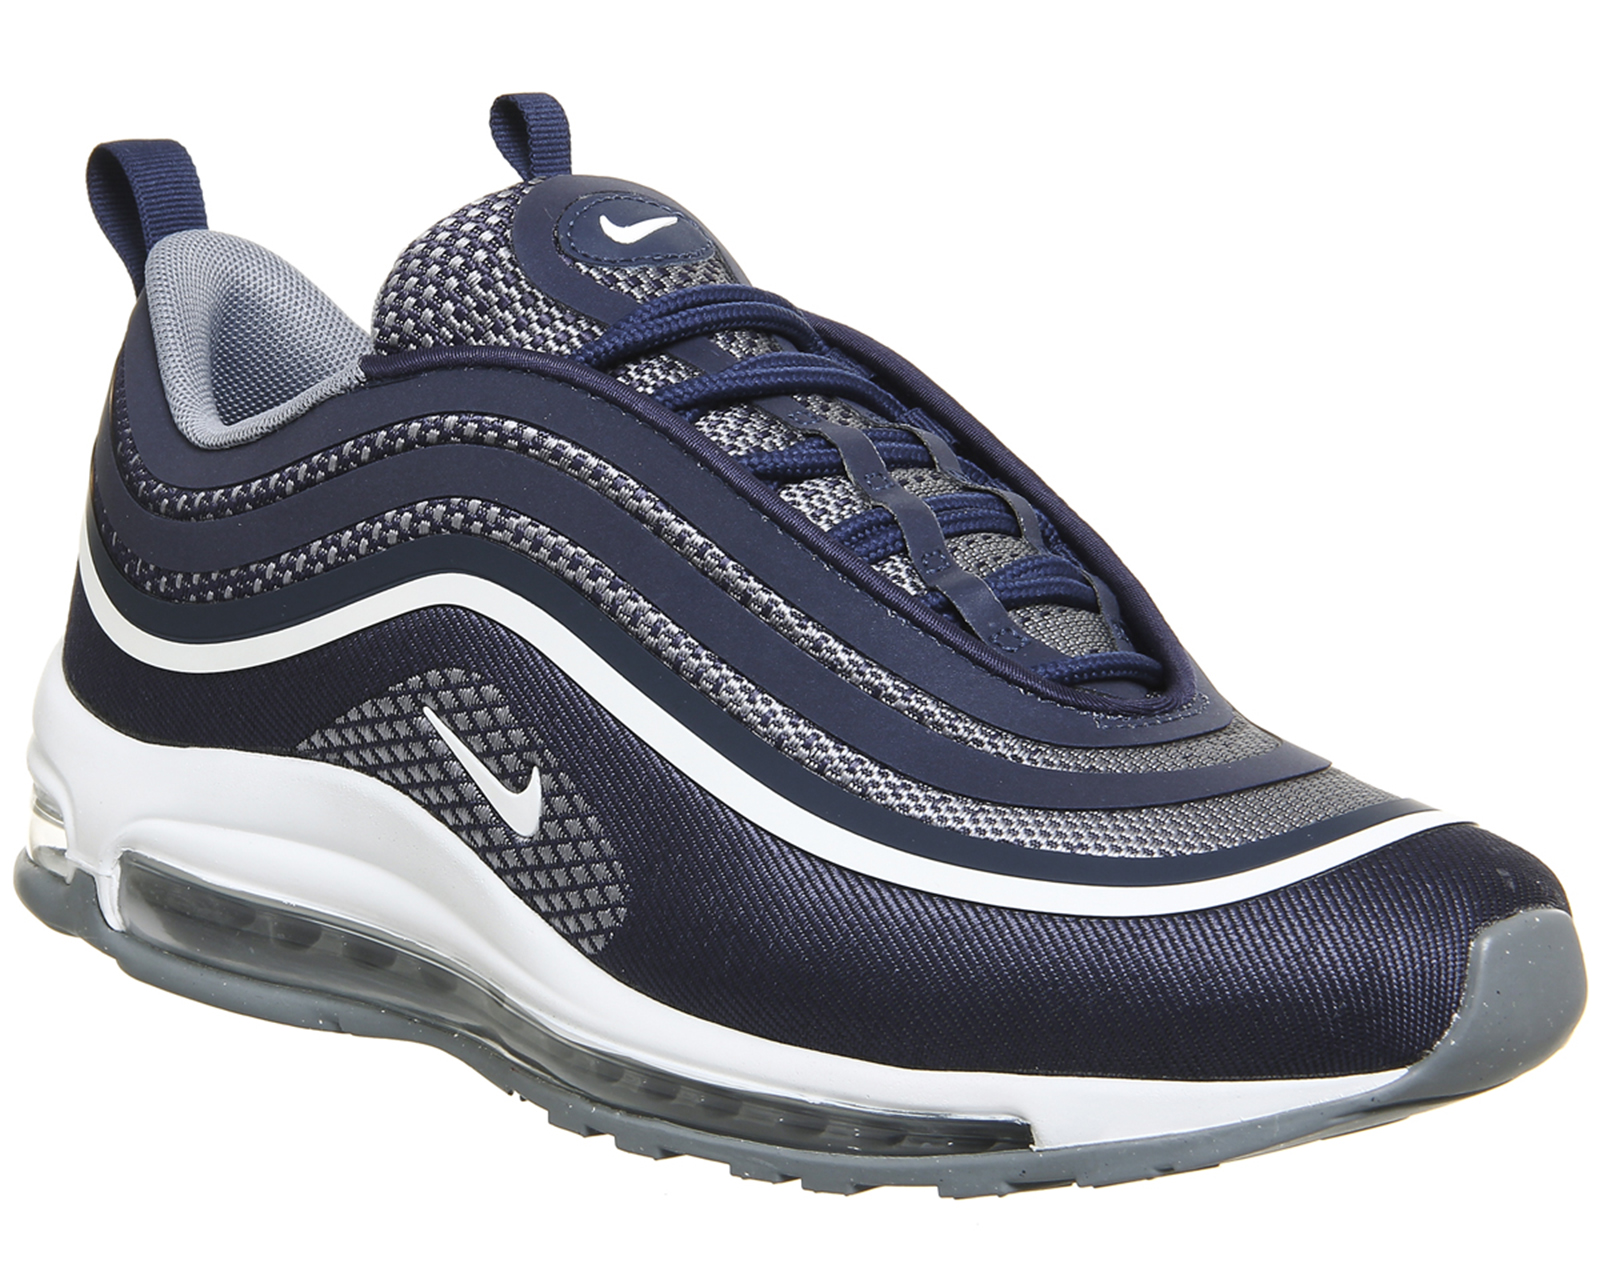 Nike Air Max 97 Ul Midnight Navy White - His trainers